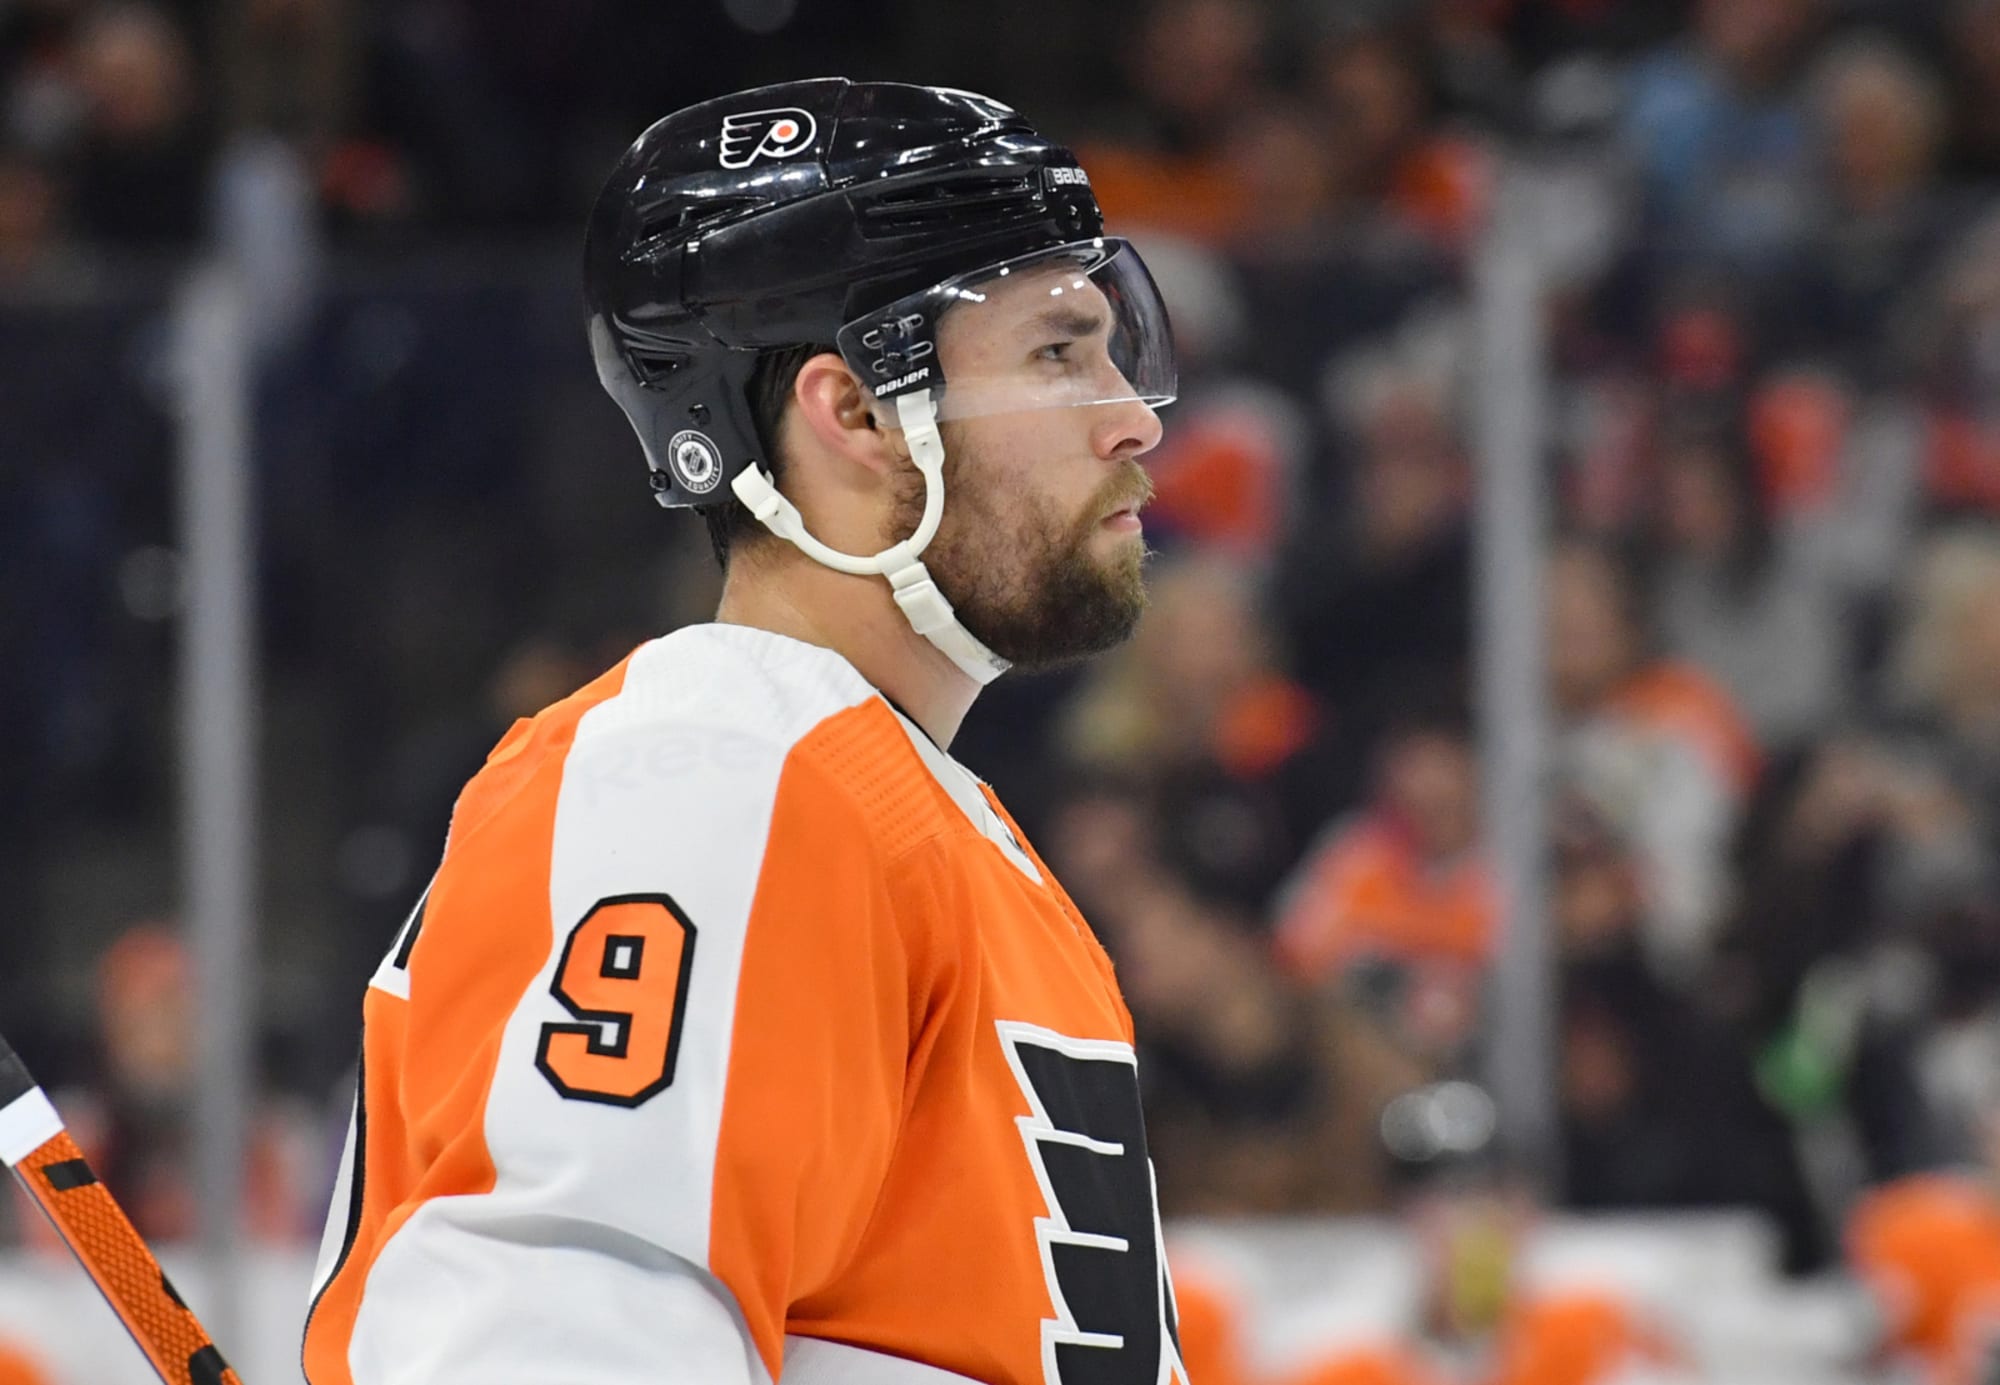 The faces of the Flyers franchise, by season